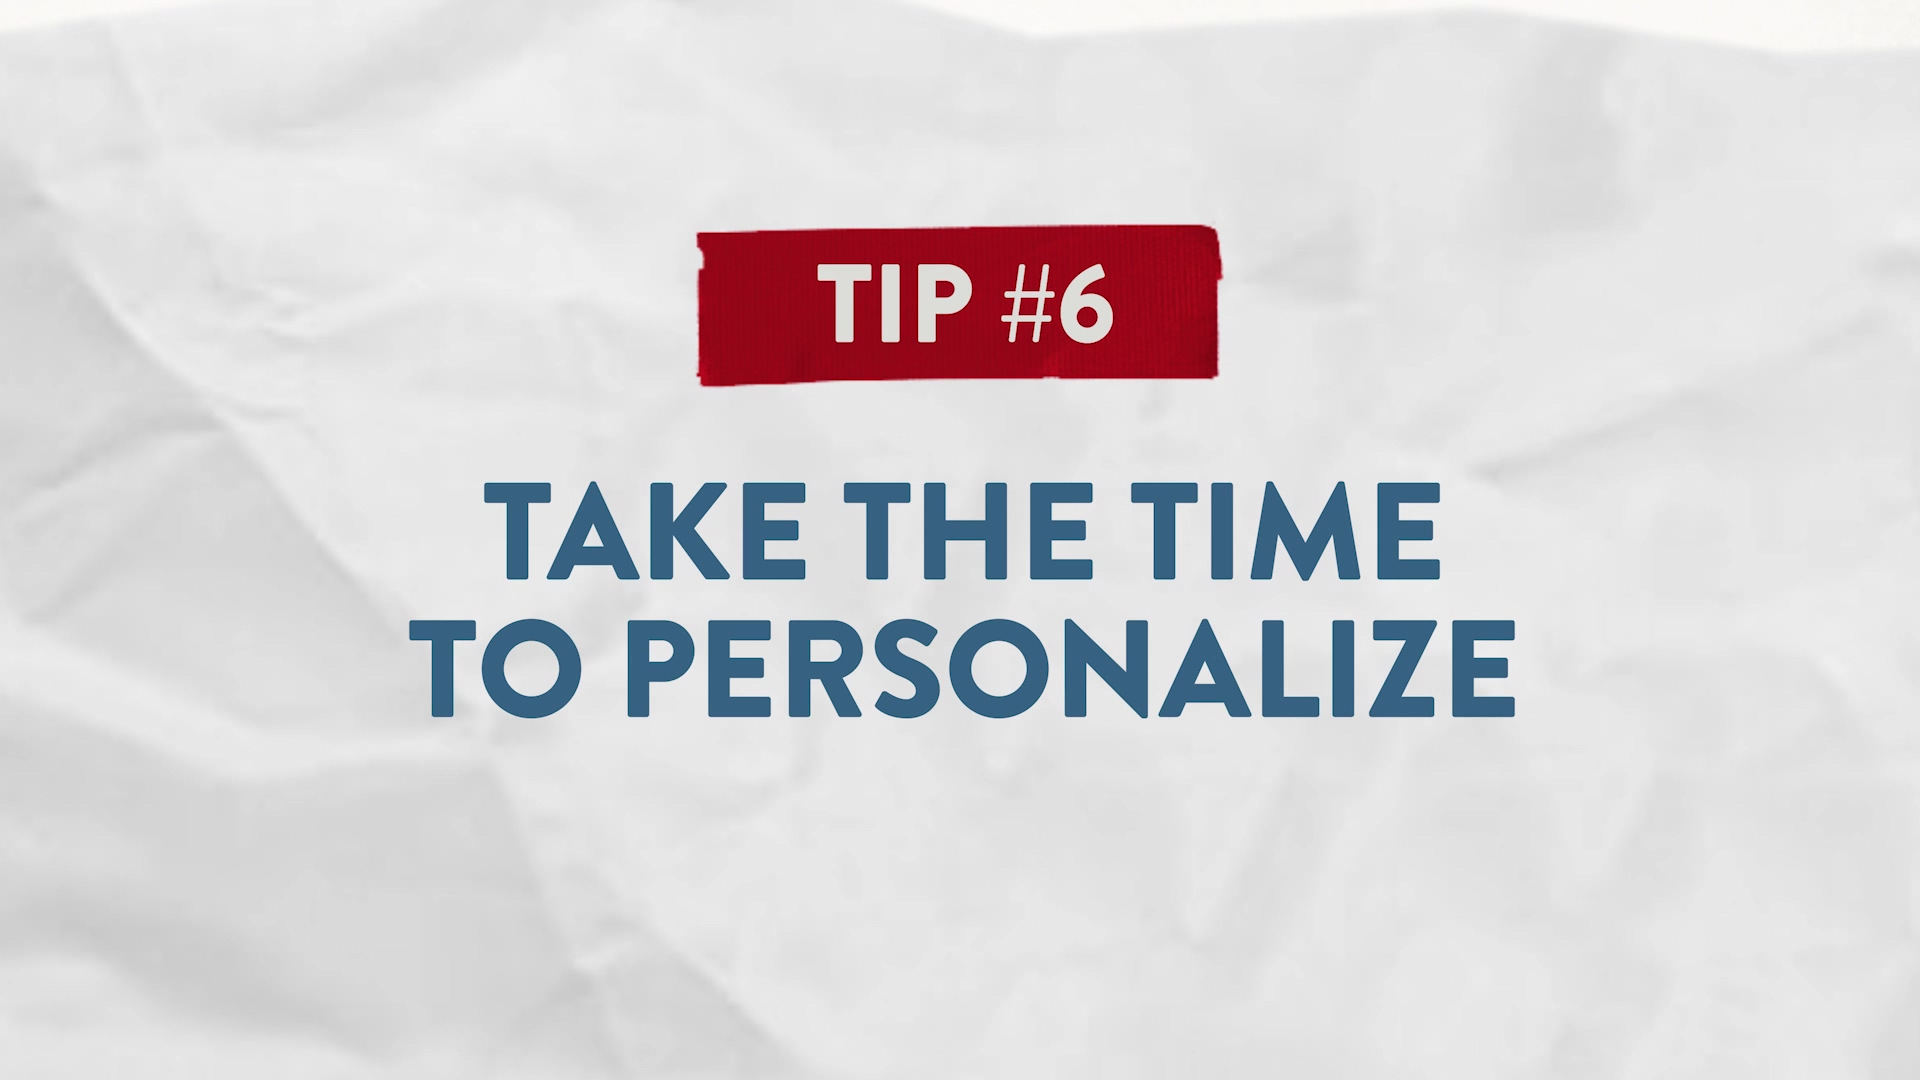 Tip #6 Take the Time to Personalize